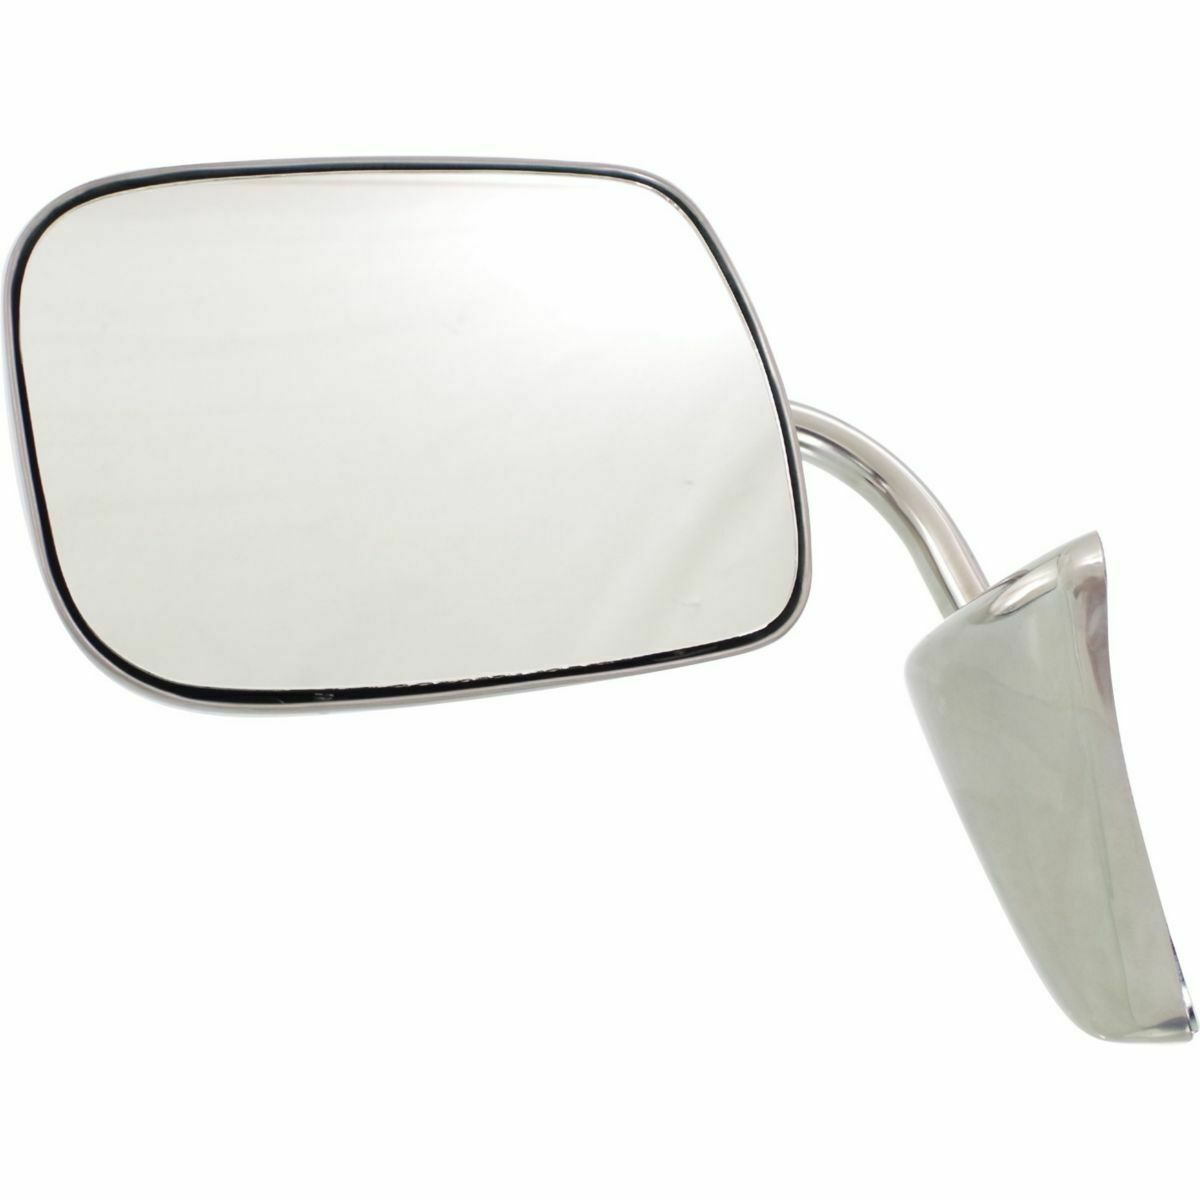 Chrome Manual Side View Mirrors LH & RH Pair Set For 1973-86 Chevy GMC Truck